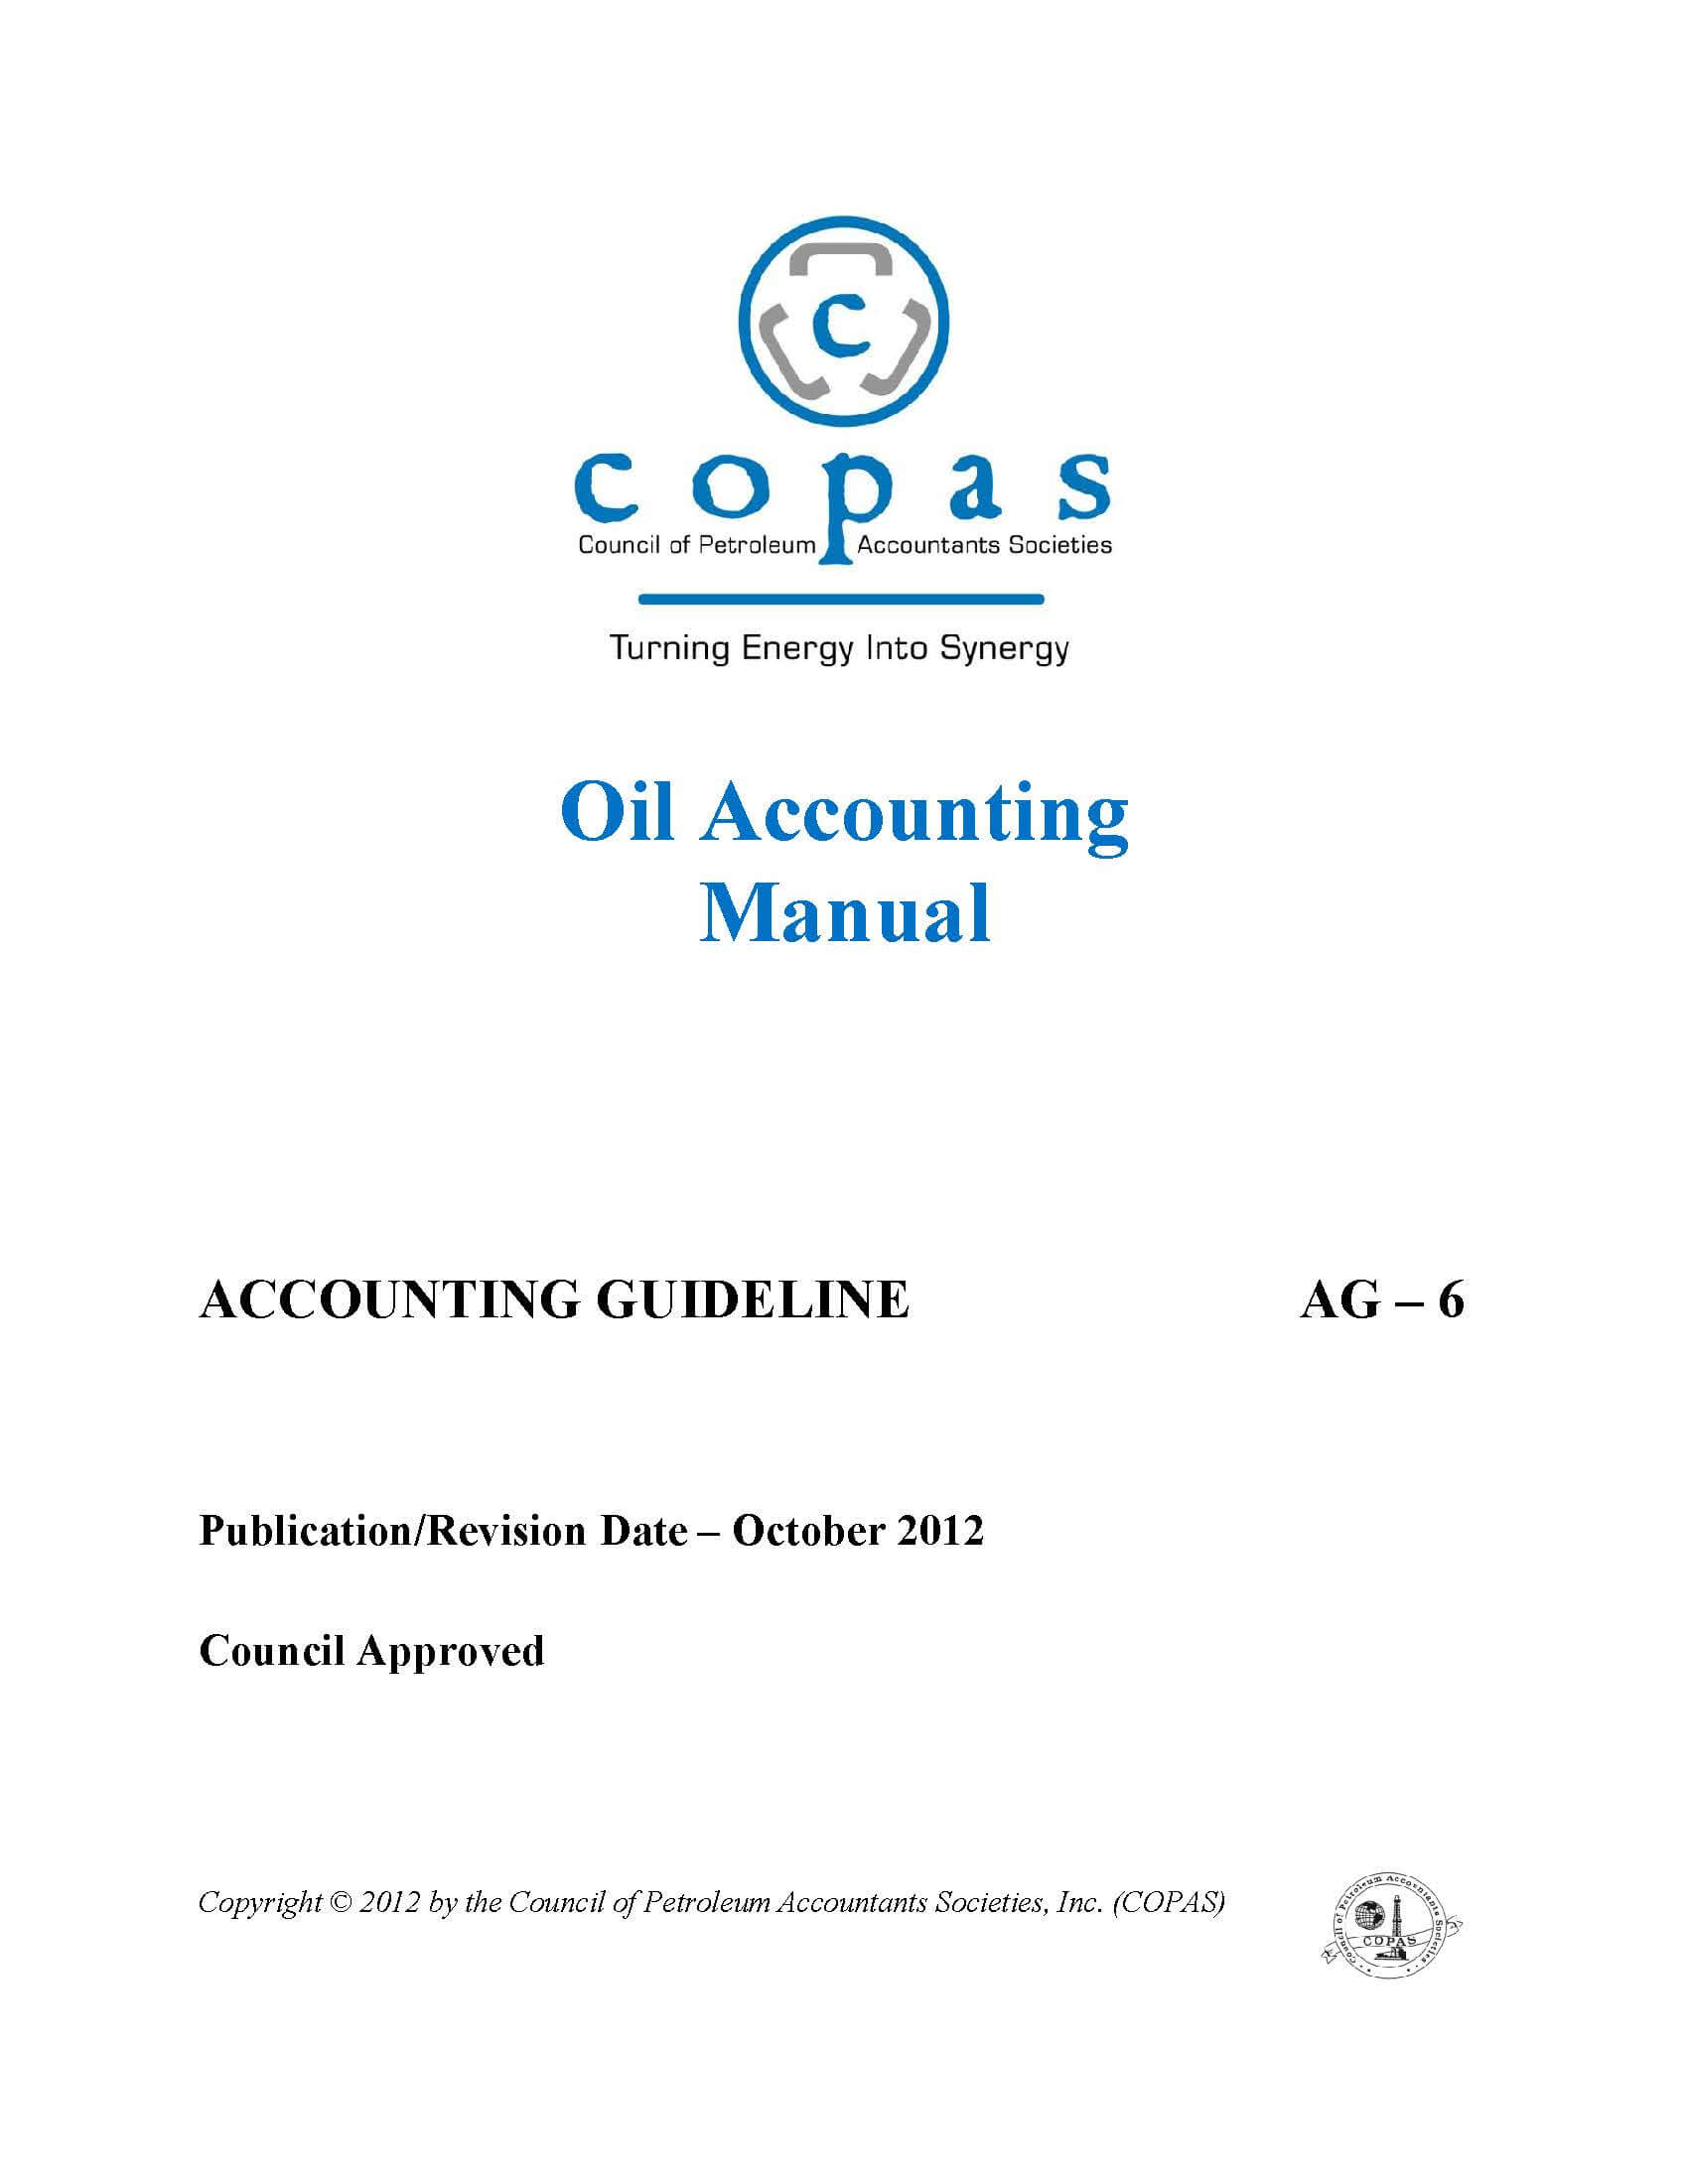 AG-6 Oil Accounting Manual - products AG 6 Oil Accounting Manual - Council of Petroleum Accountants Societies